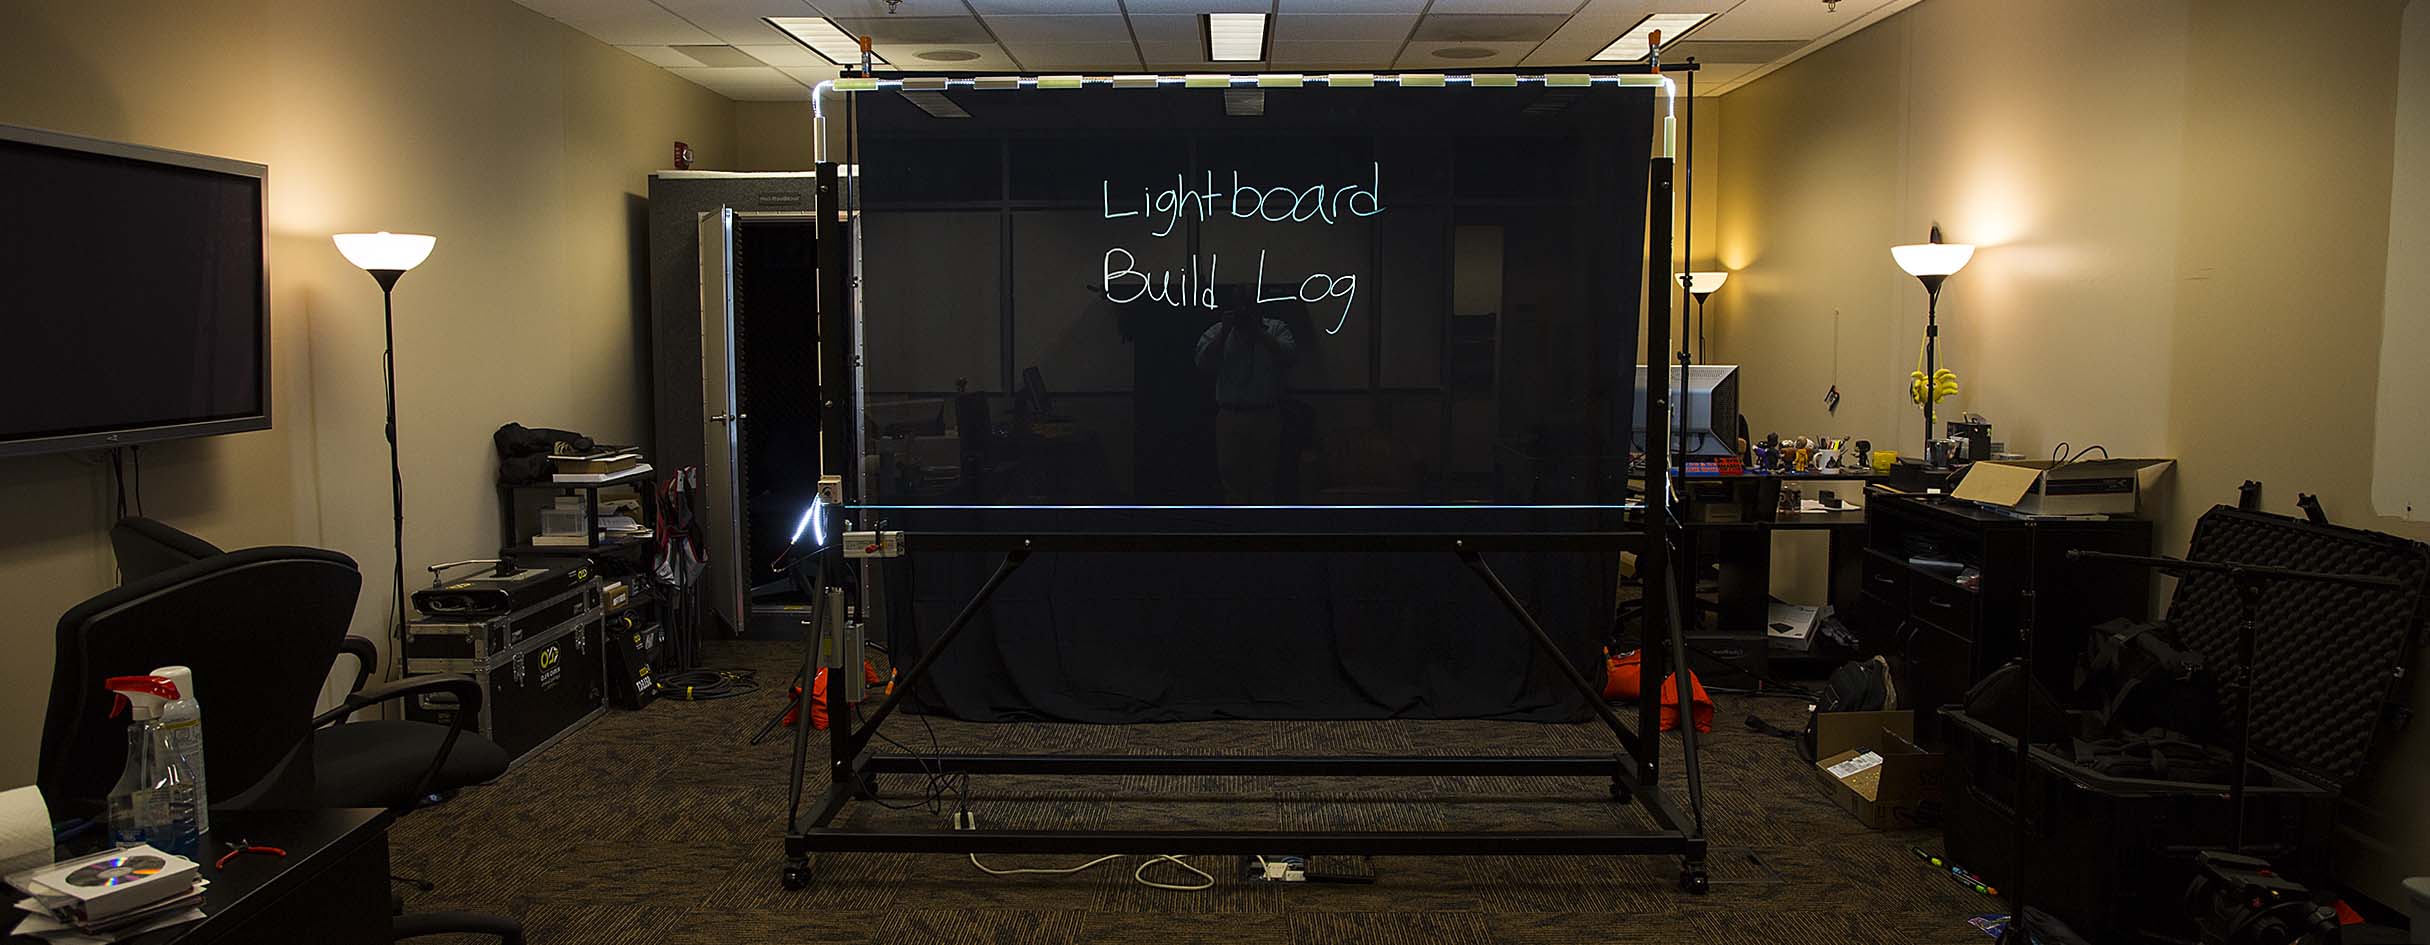 Can be used as light board Fully Translucent PDR Board Use with light behind 